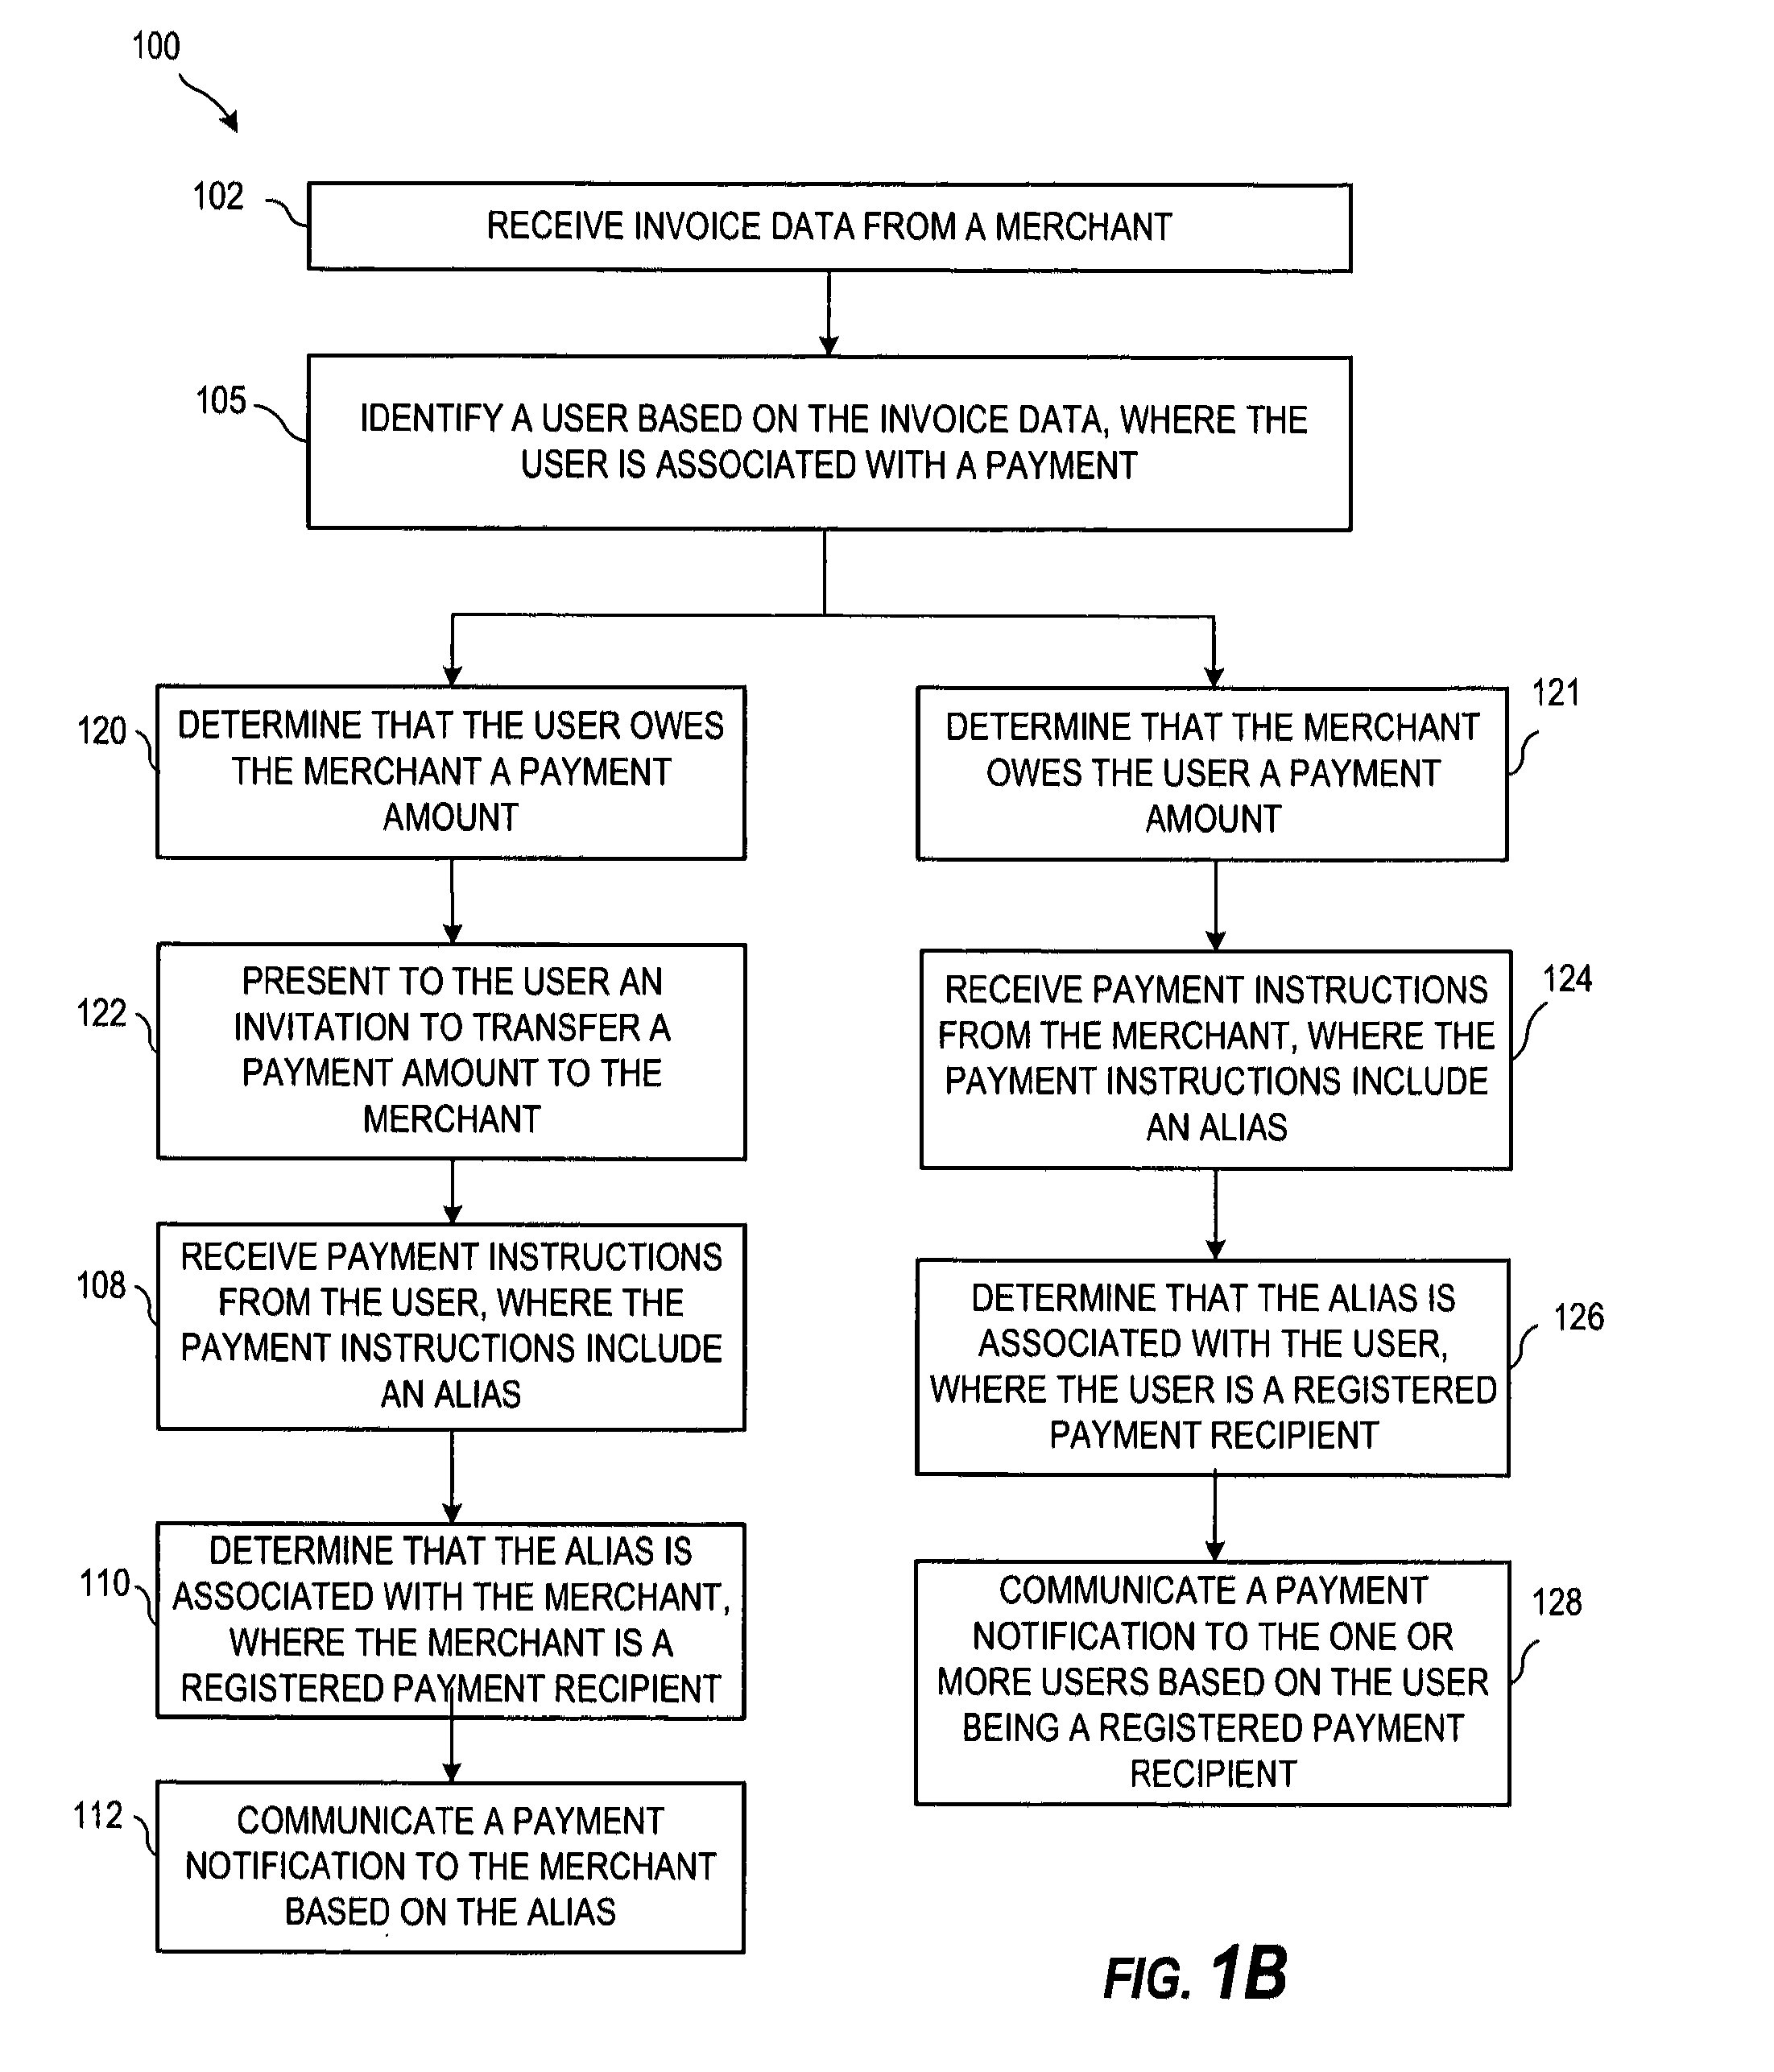 Invoicing and electronic billing system and method